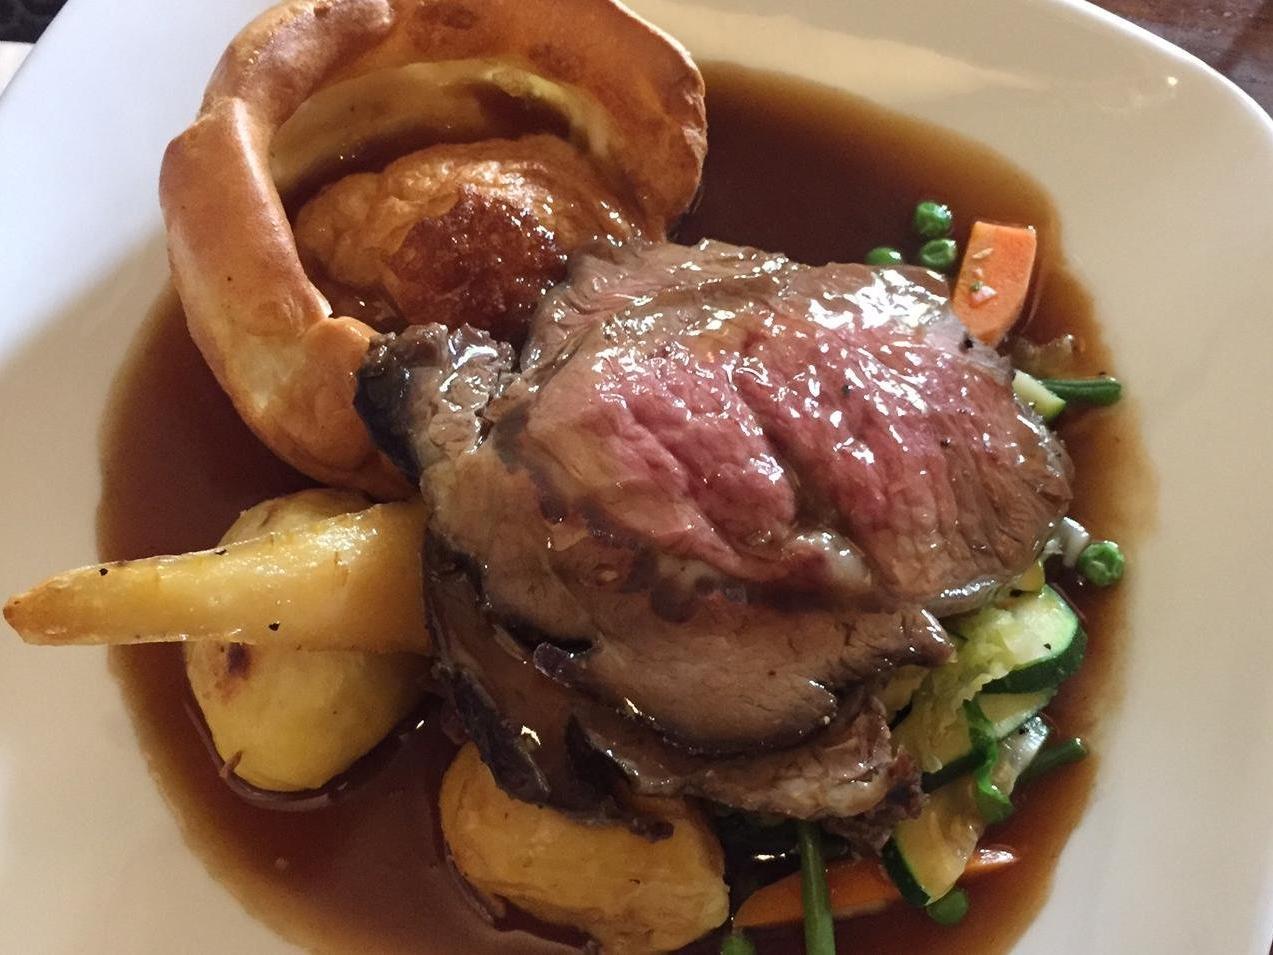 The roast dinner that is served at The Narrow Boat in Weedon - another eatery that has made the AA's guide.